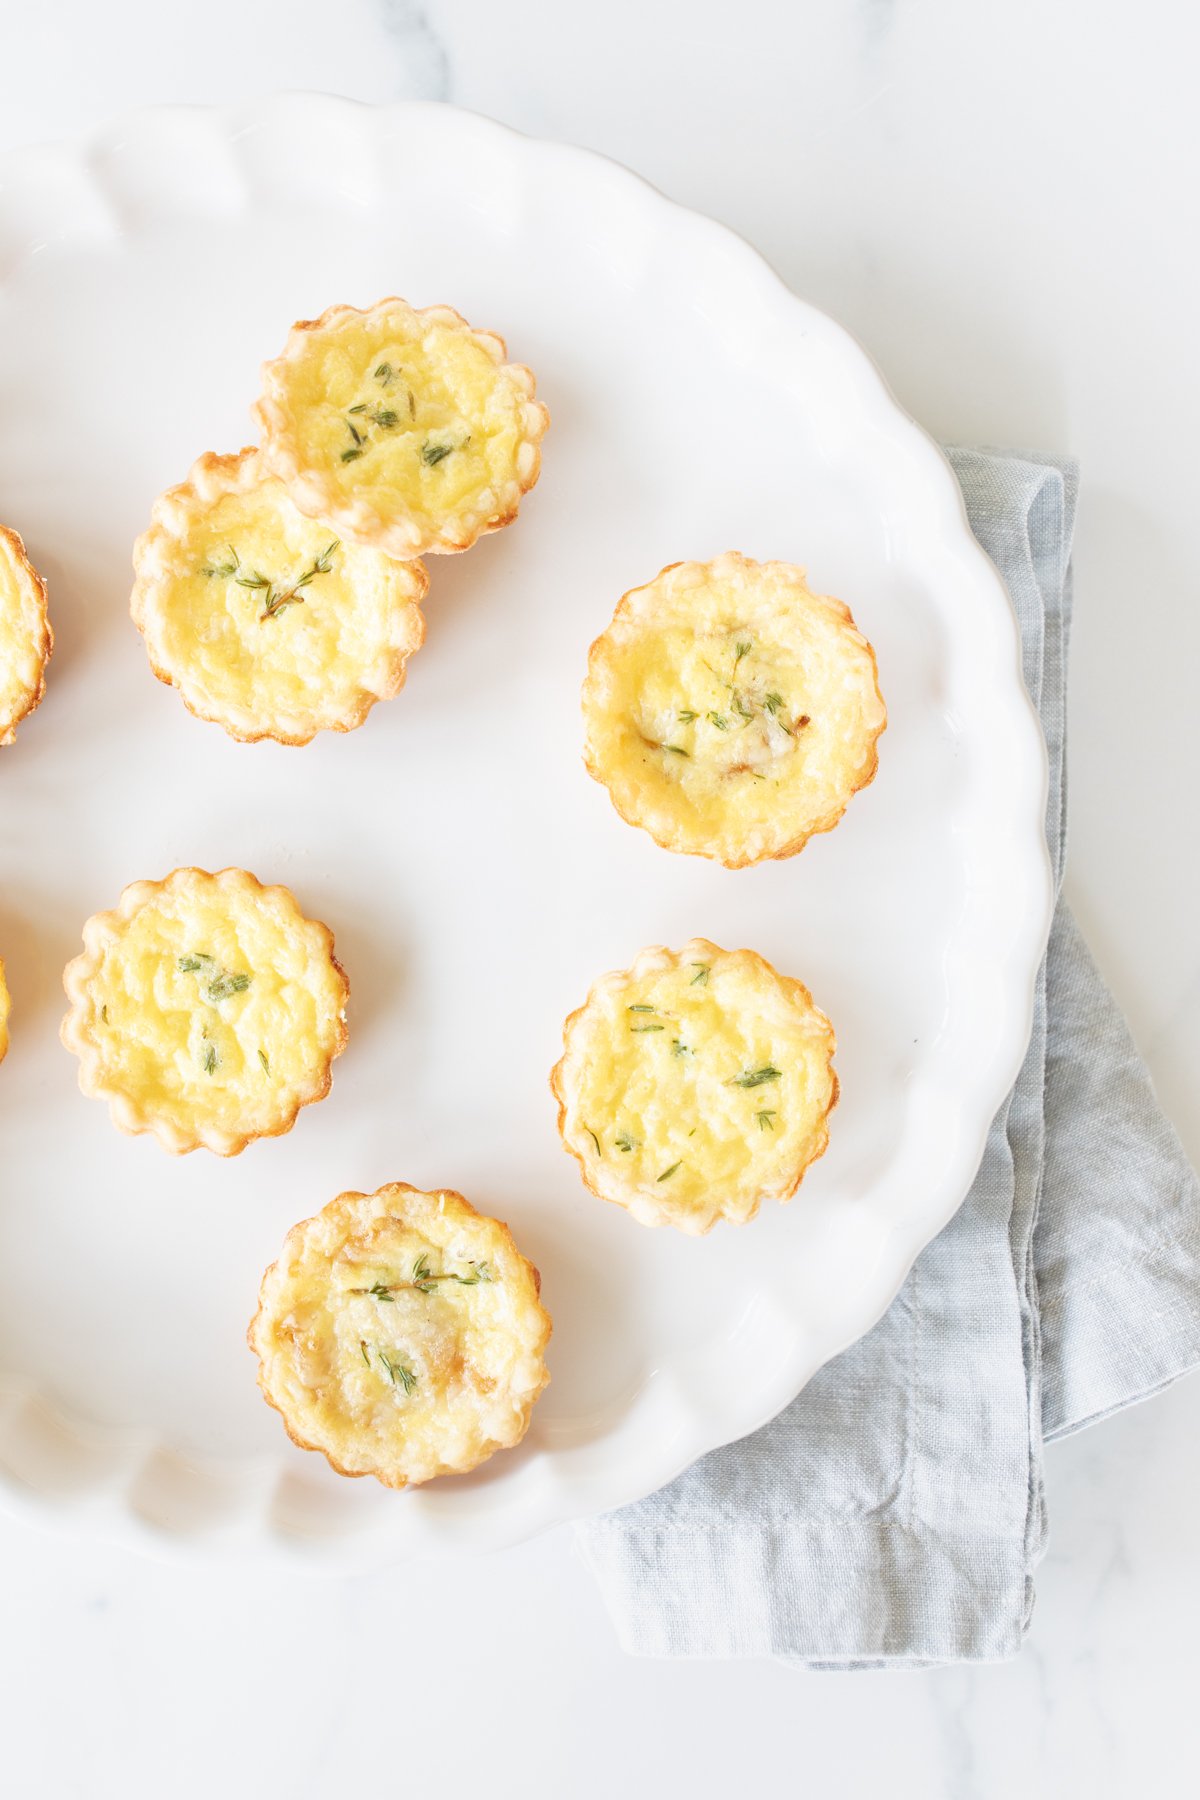 Mini cheddar cheese tarts on a white platter in an hors d'oeuvres recipe collection